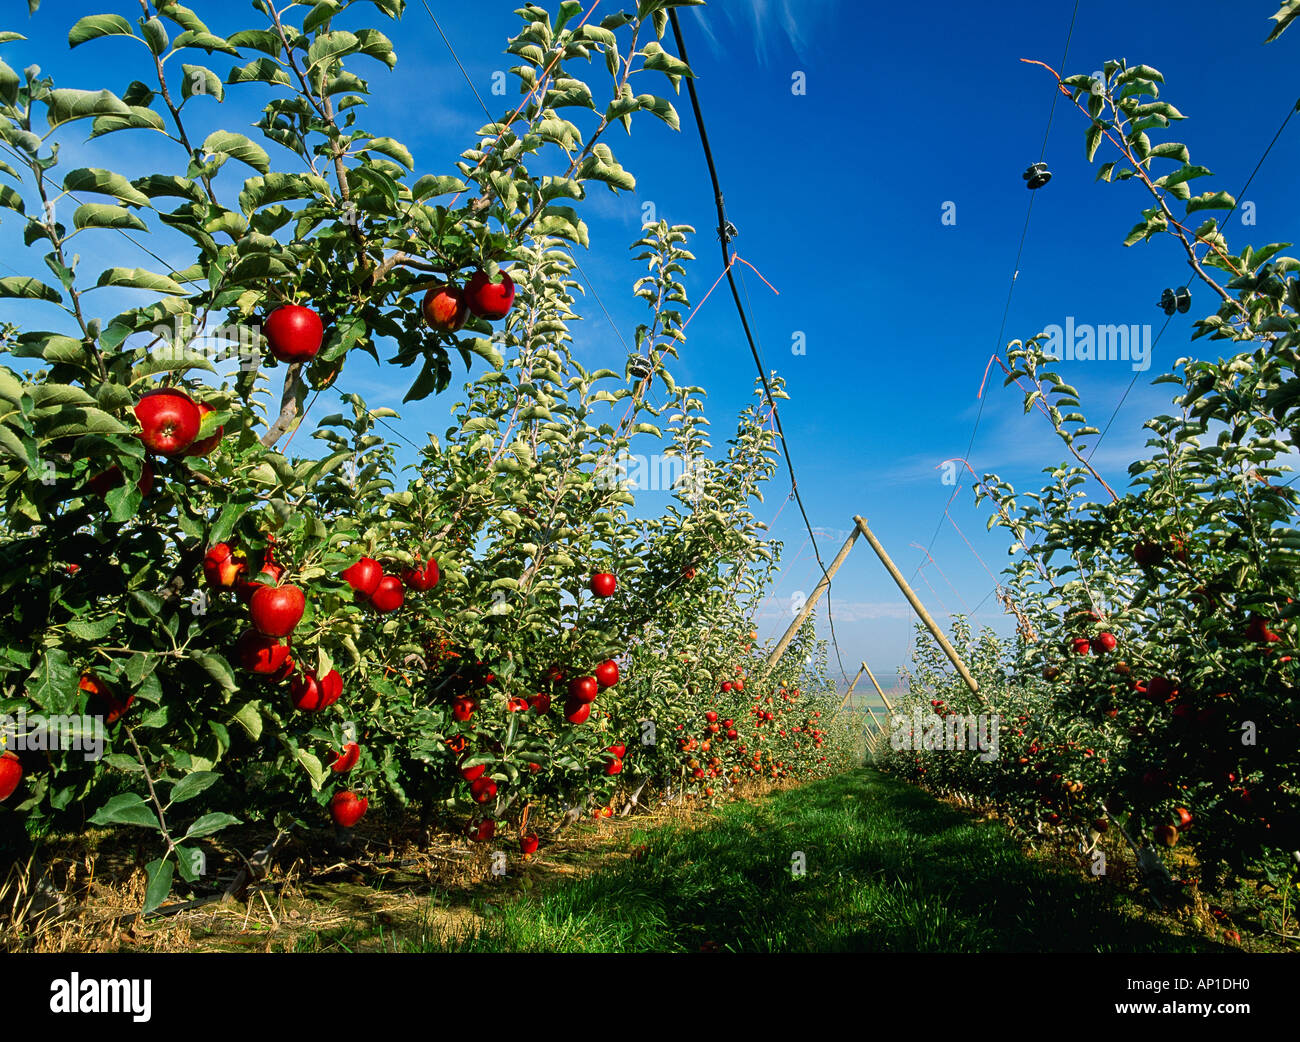 Agriculture - Jonagold apple orchard on a "V" trellis system with ripe  fruit on the trees / Columbia Basin, Washington, USA Stock Photo - Alamy